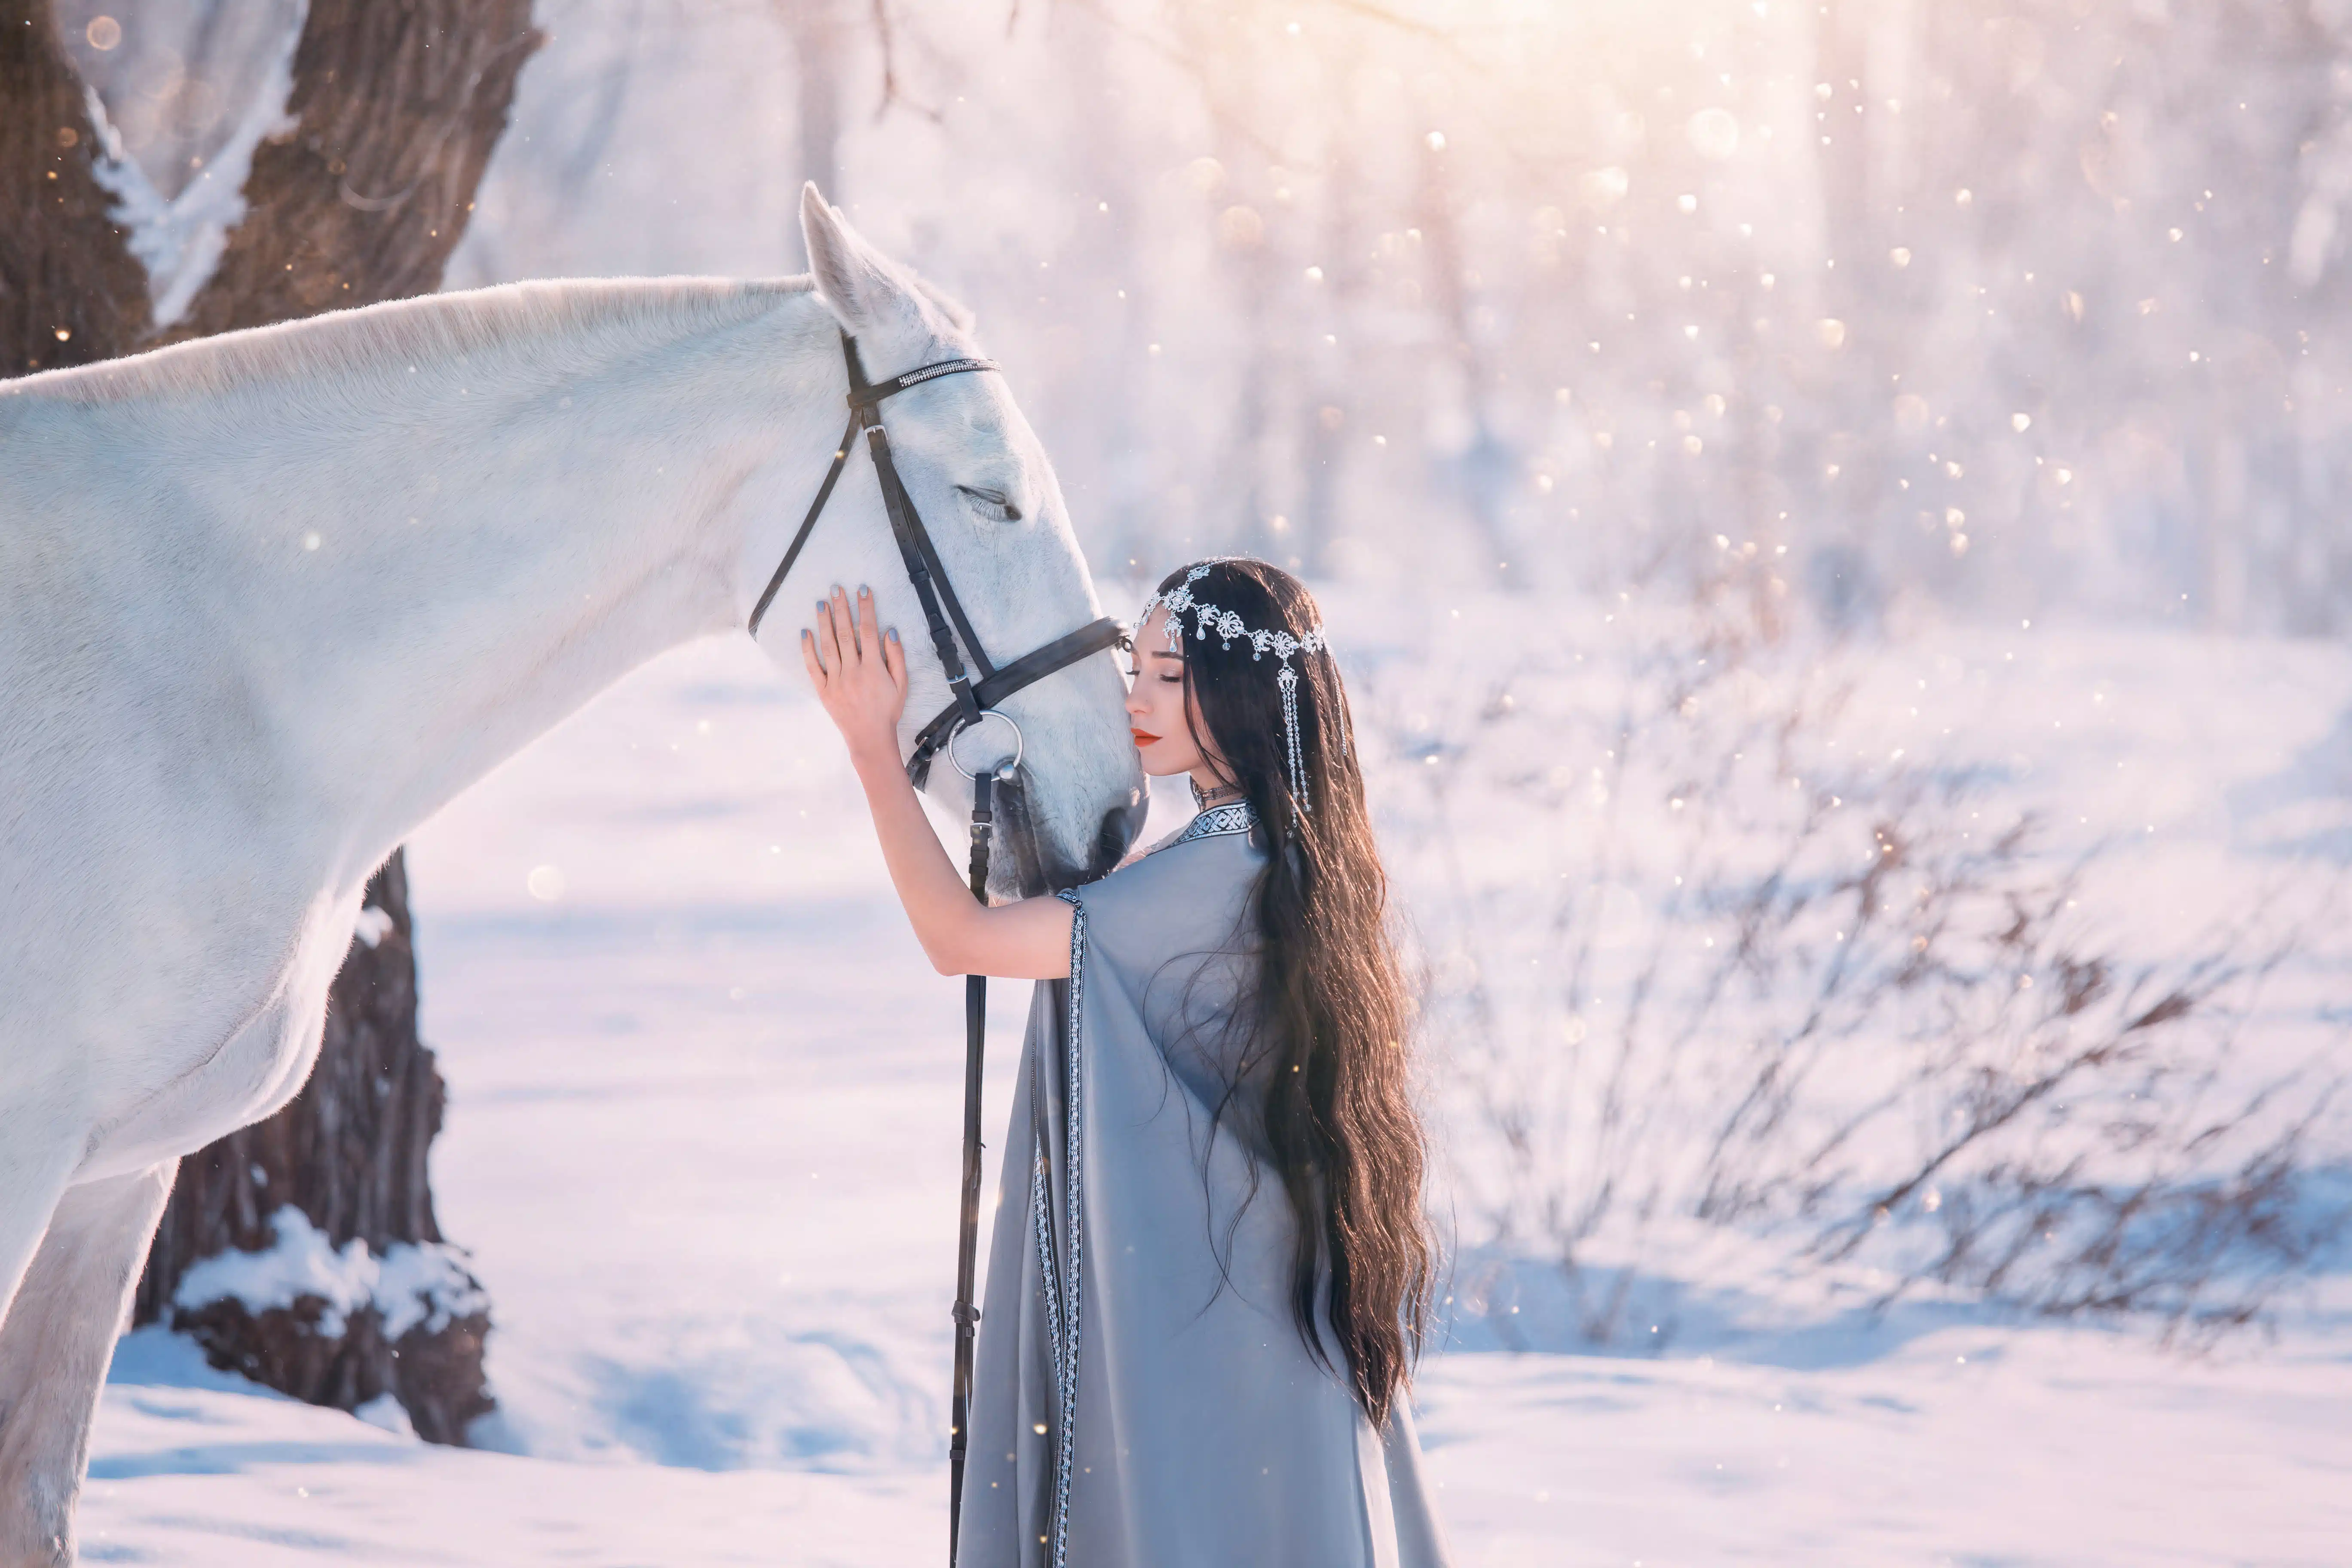 princess with long black wavy curly hair stands next to white gorgeous horse in snowy forest